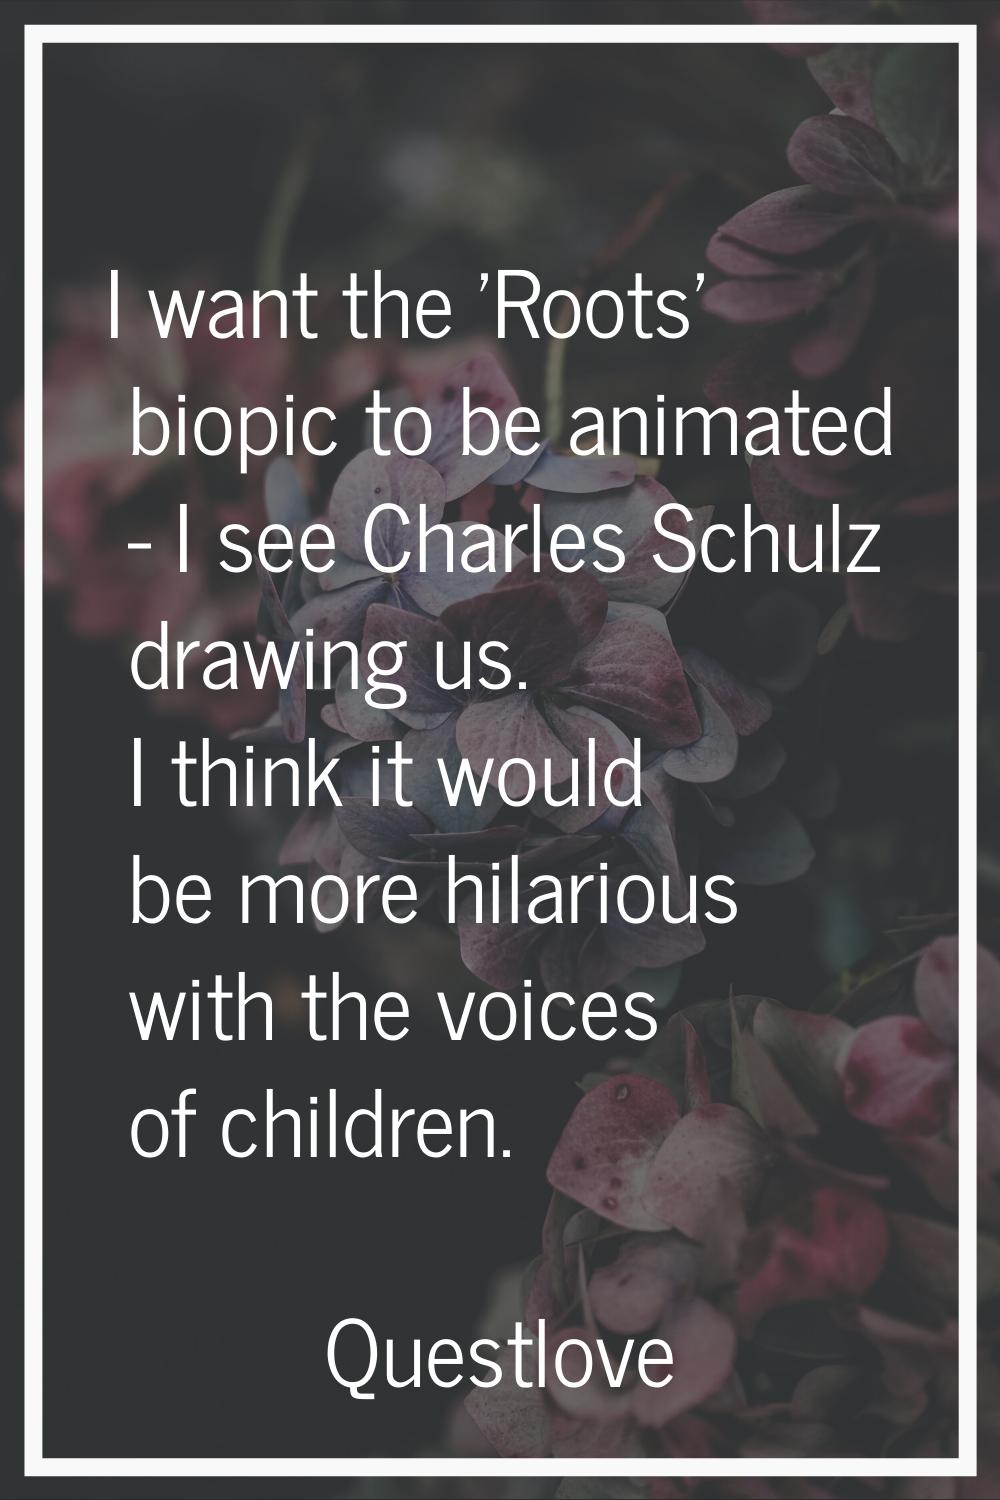 I want the 'Roots' biopic to be animated - I see Charles Schulz drawing us. I think it would be mor